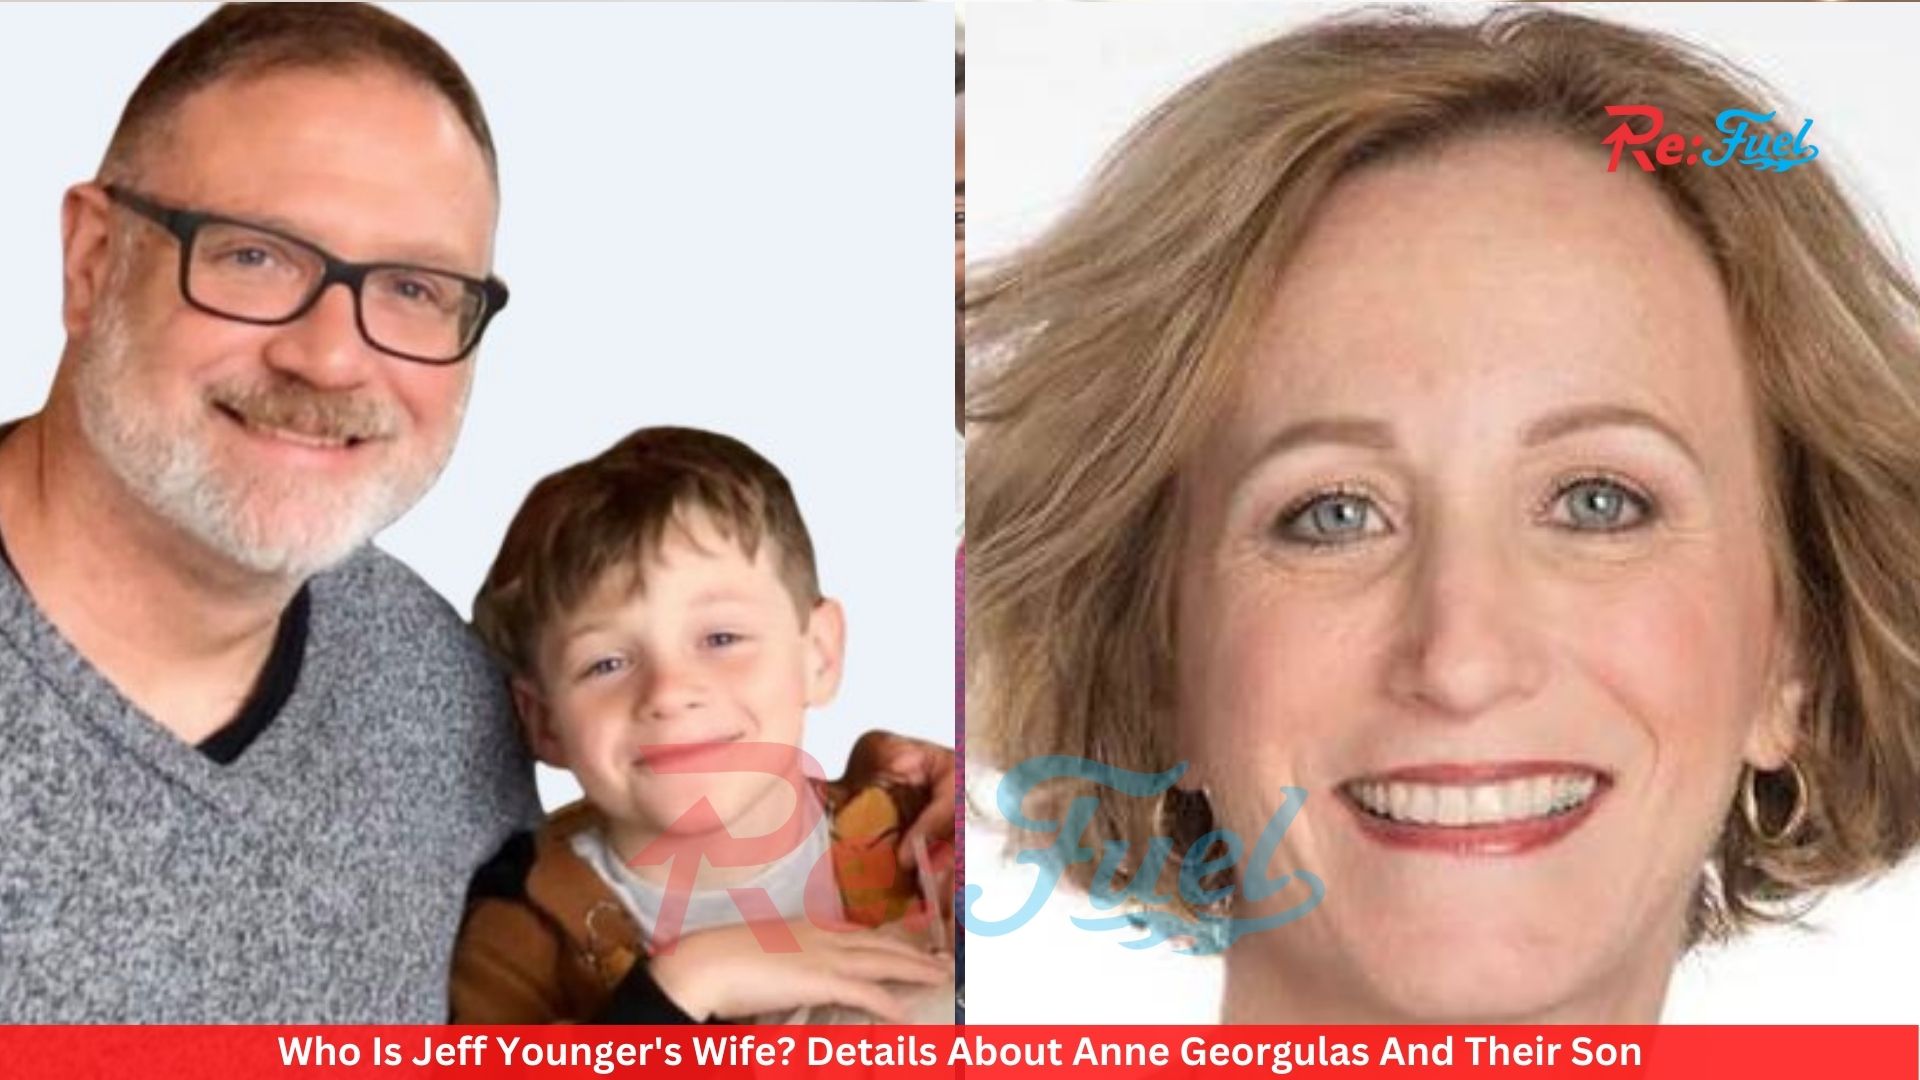 Who Is Jeff Younger's Wife? Details About Anne Georgulas And Their Son